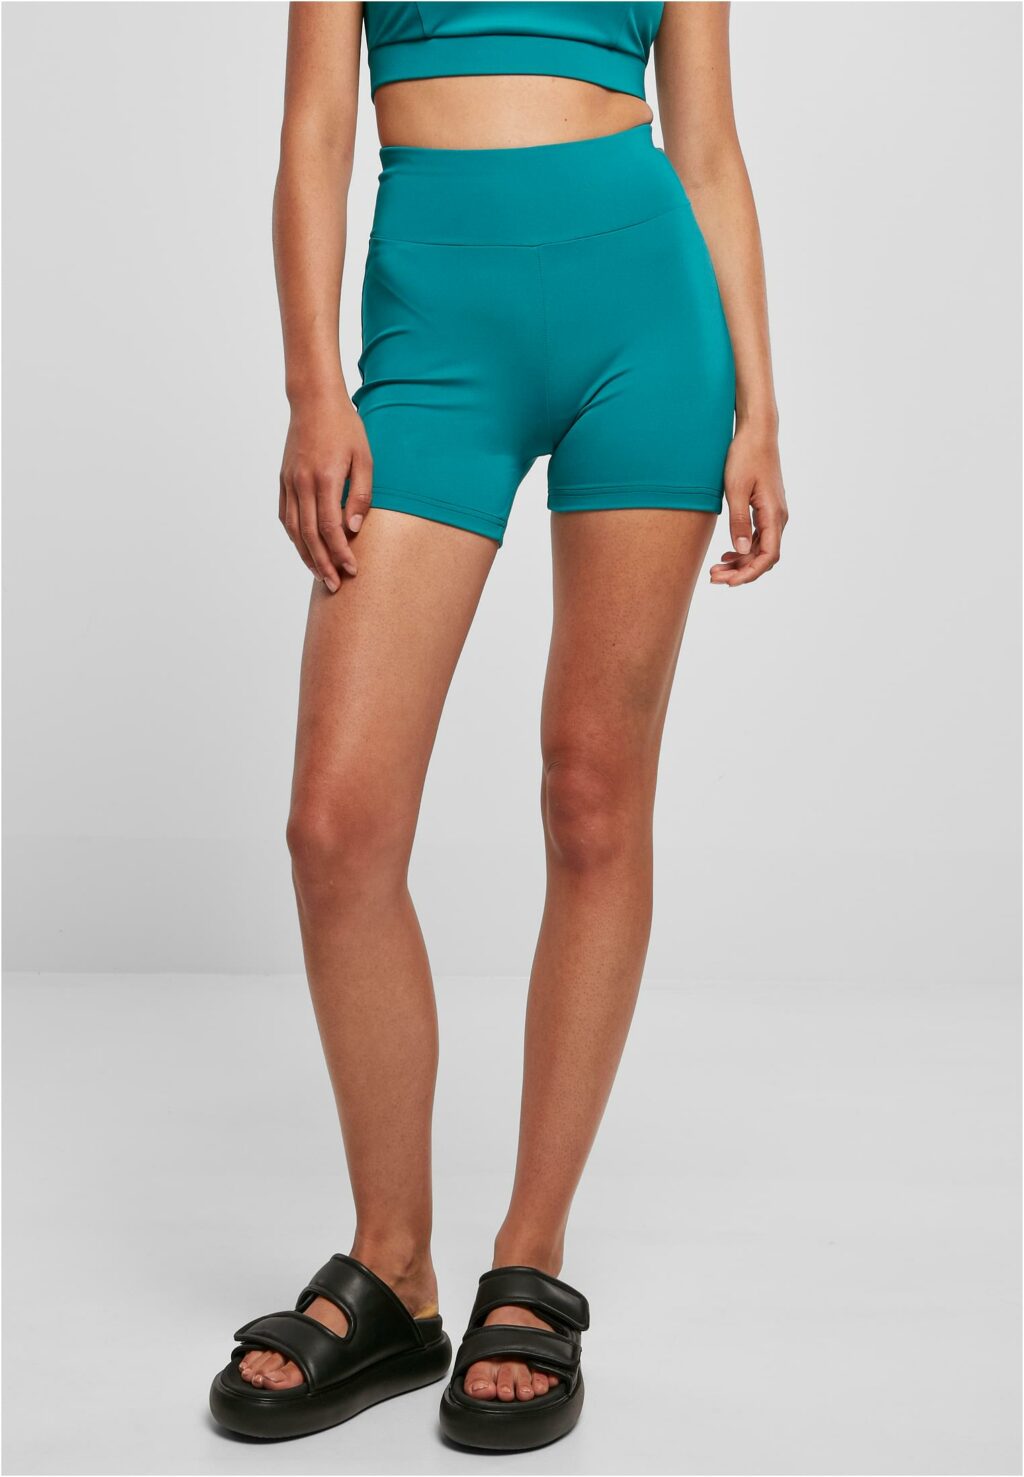 Urban Classics Ladies Recycled High Waist Cycle Hot Pants watergreen TB4802